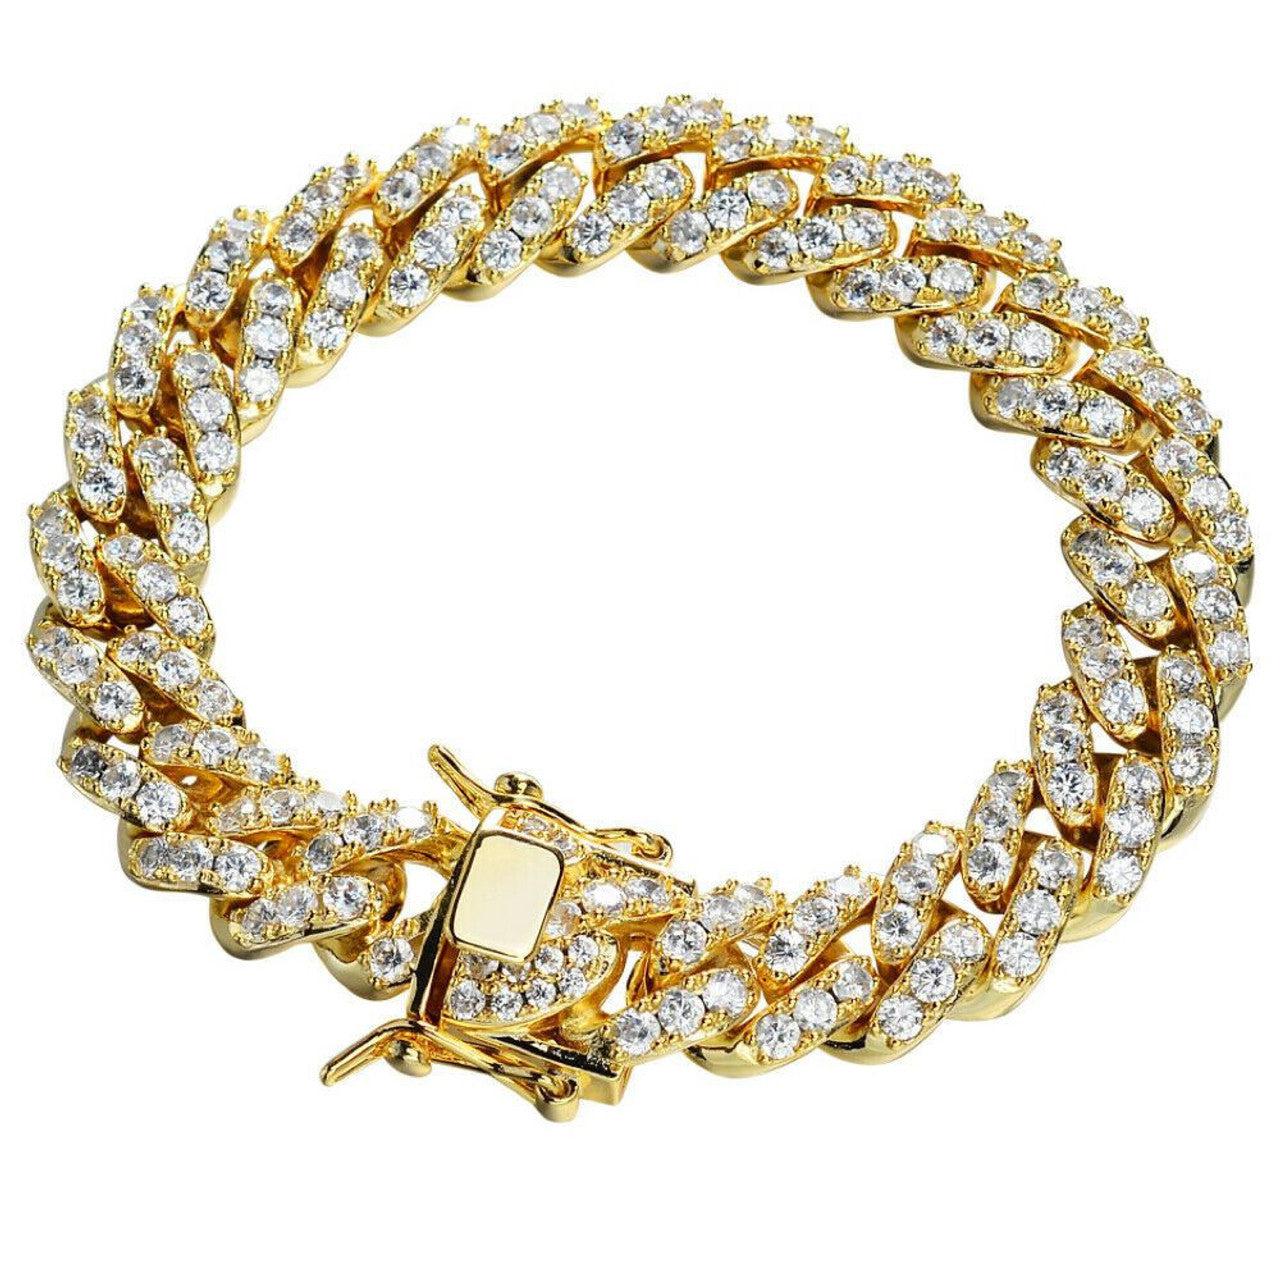 YELLOW GOLD Mens Miami Cuban Bracelet REAL Solid 925 Sterling Silver Iced CZ Heavy Link 75g